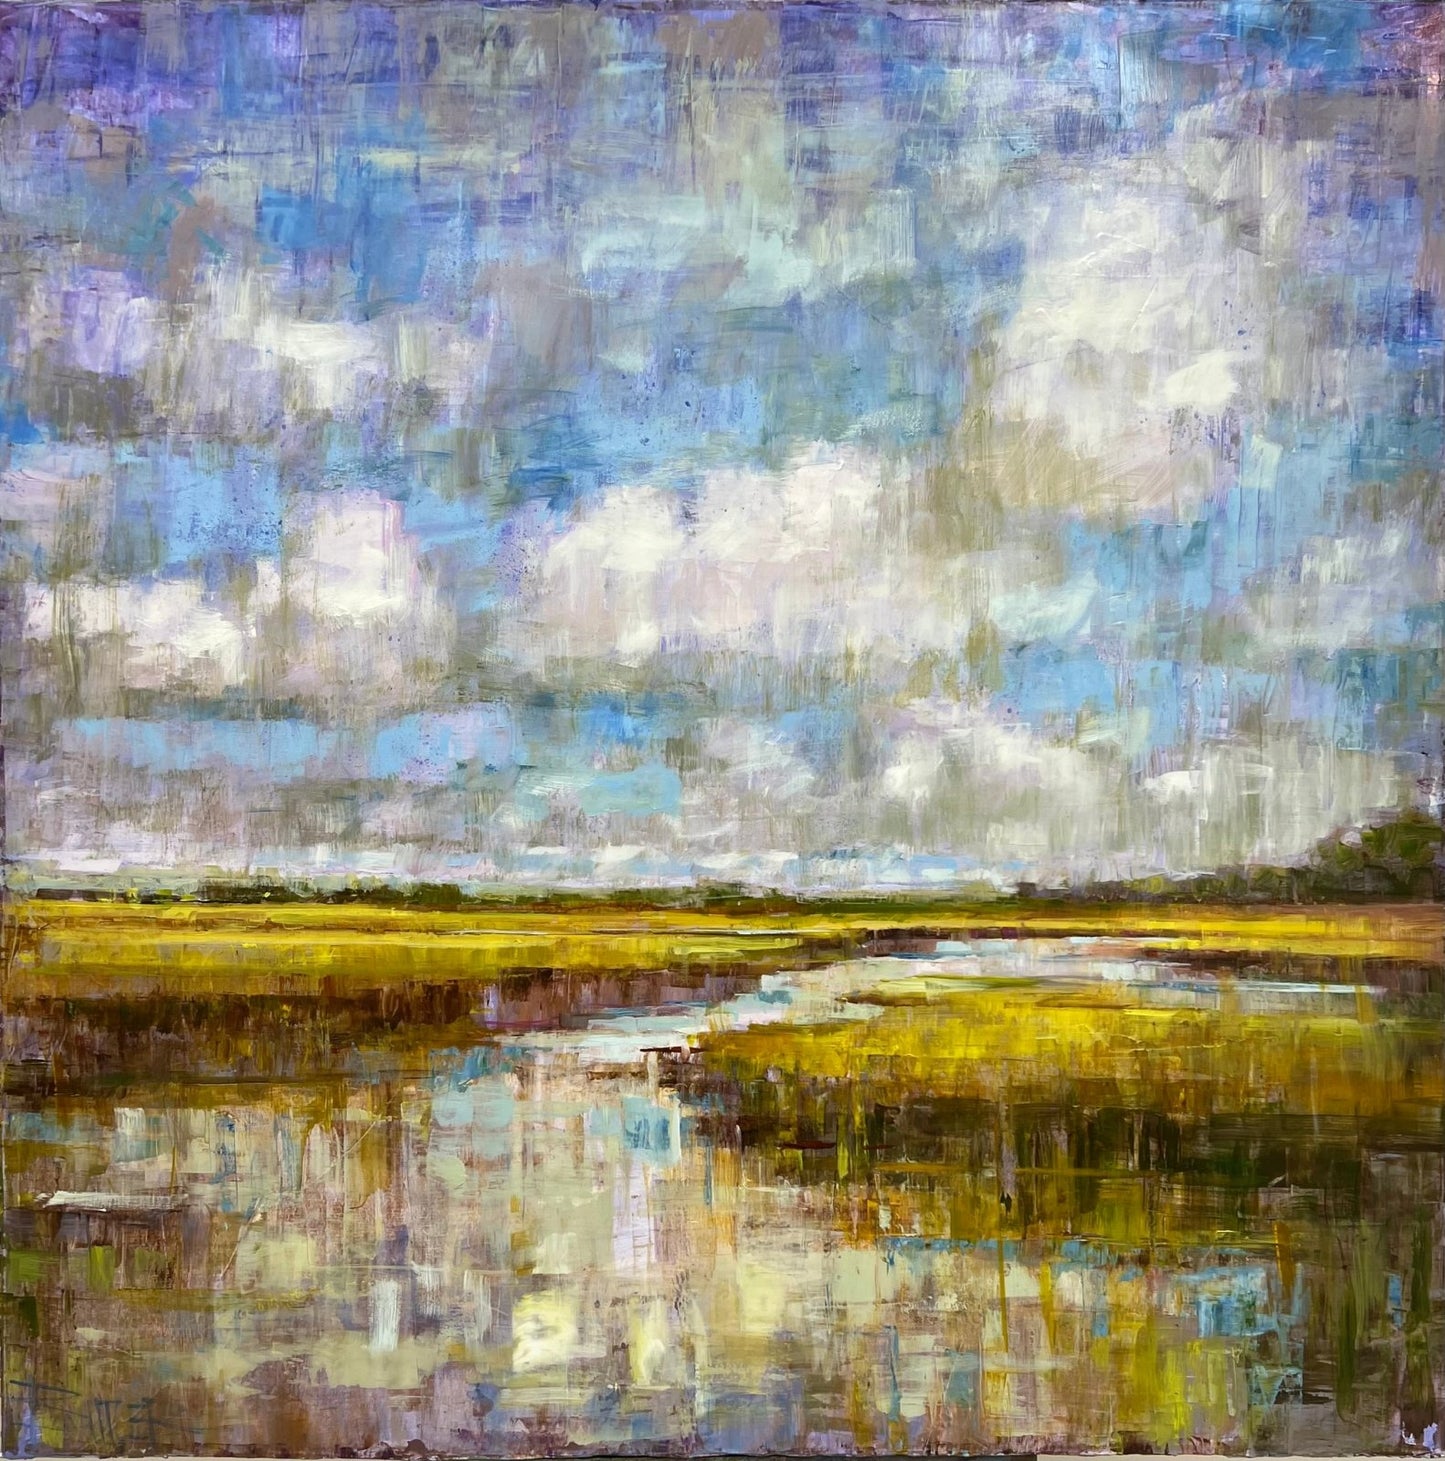 Wetland Whisper by Curt Butler at LePrince Galleries